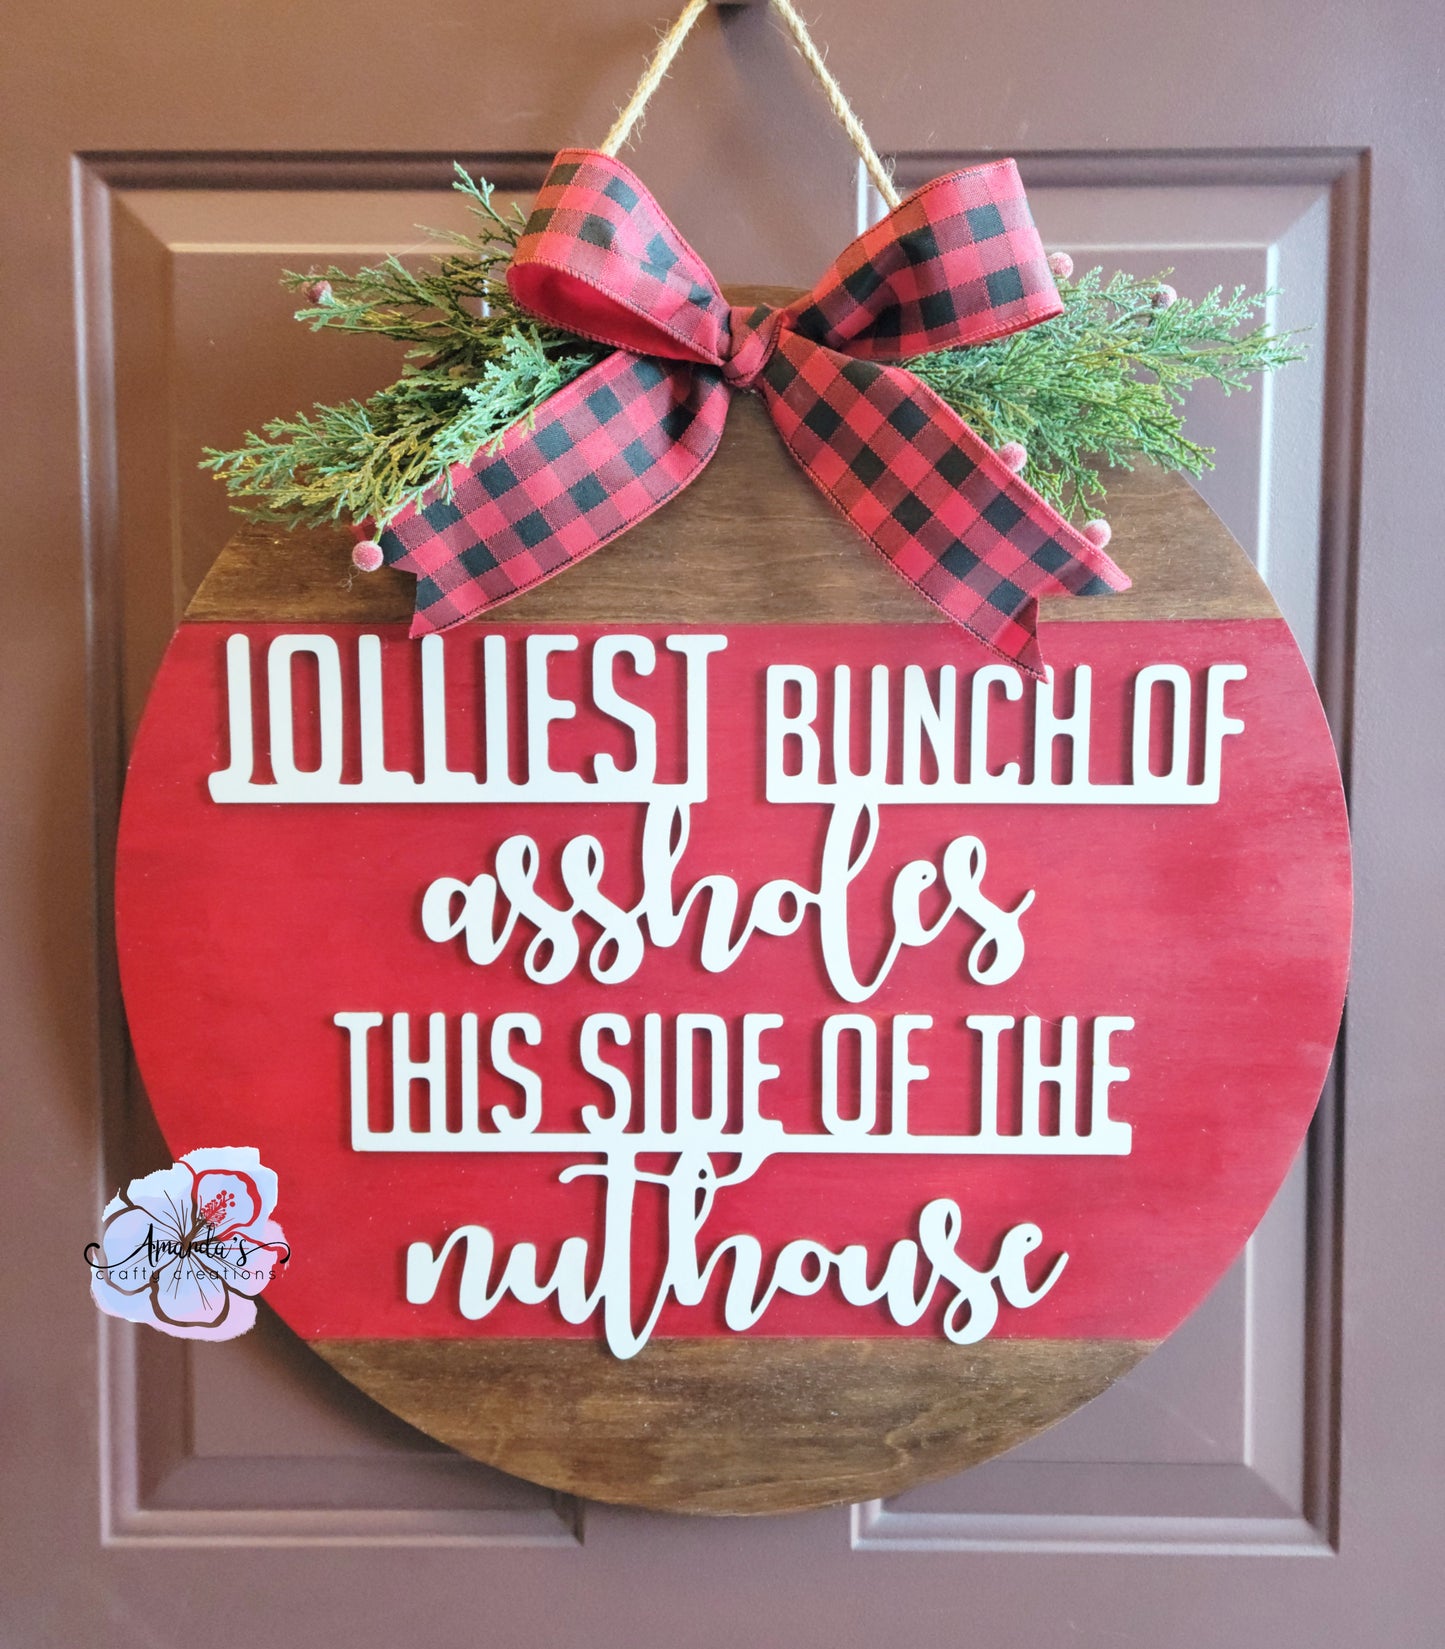 Jolliest bunch of assholes this side of the nuthouse Christmas door hanger